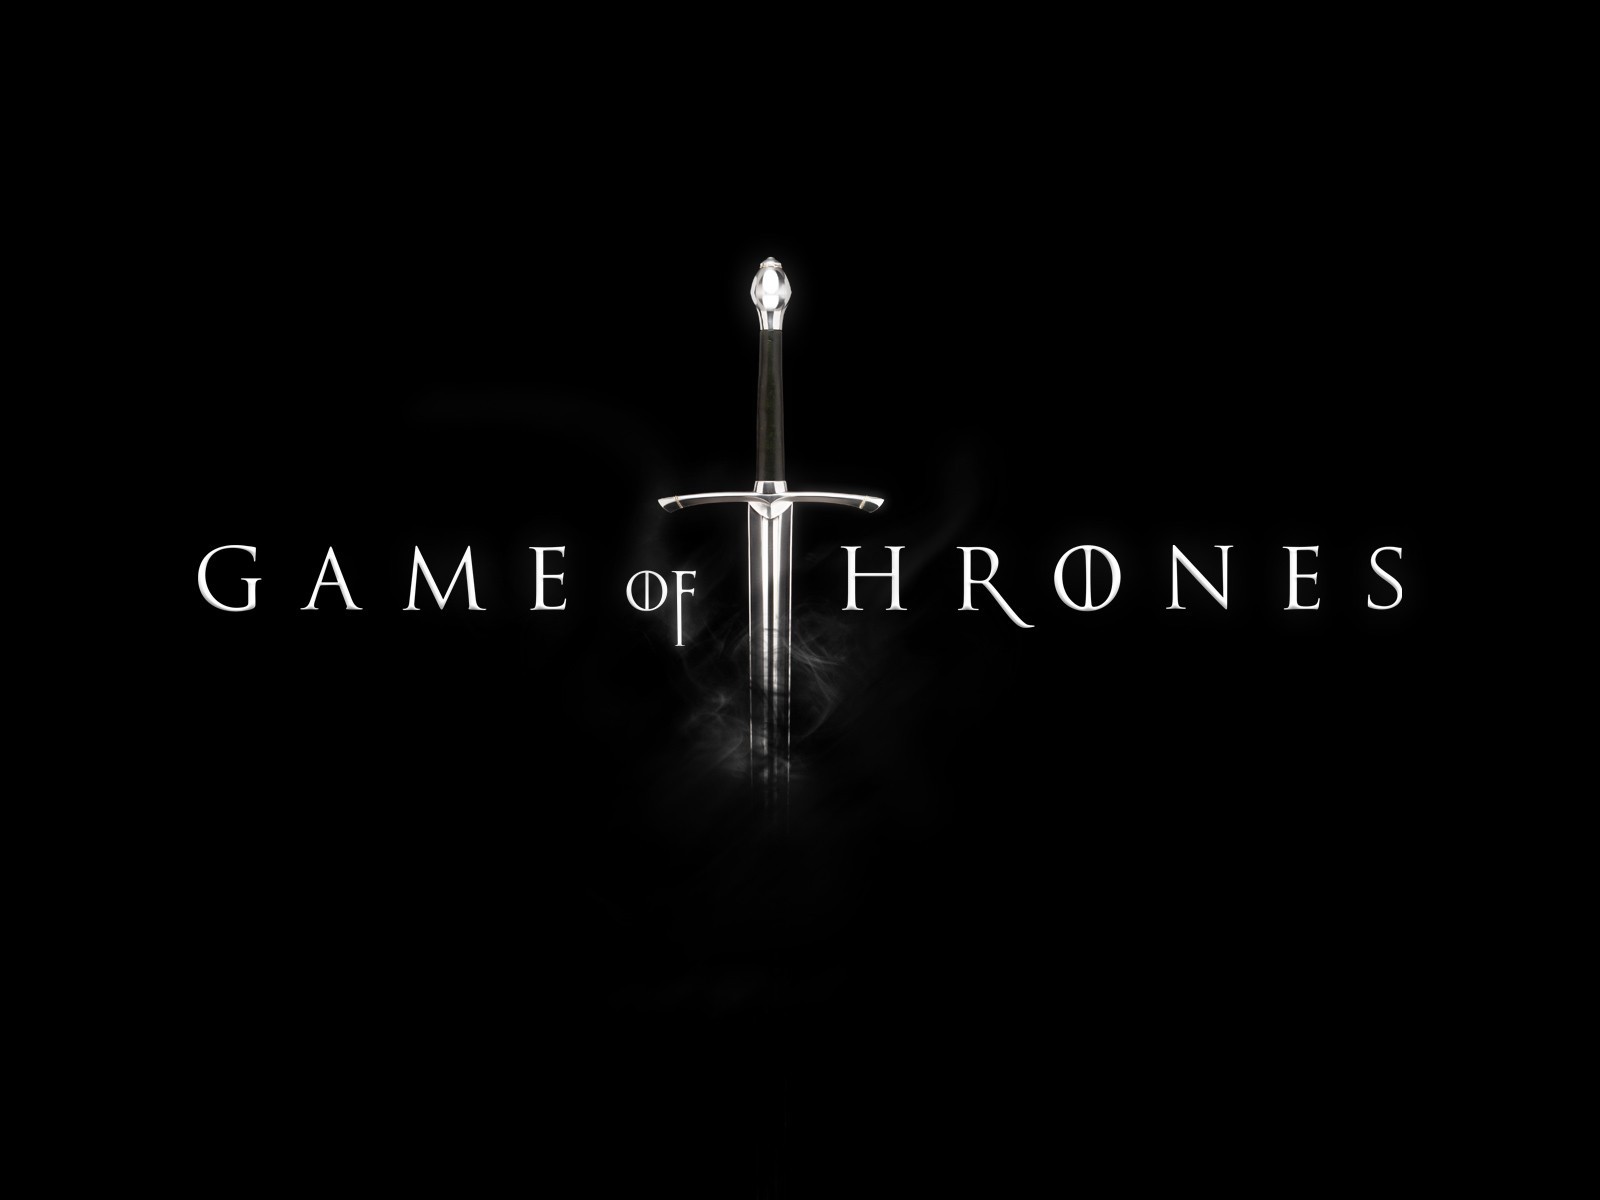  Game  of Thrones  HD  Wallpapers  wallpaper202